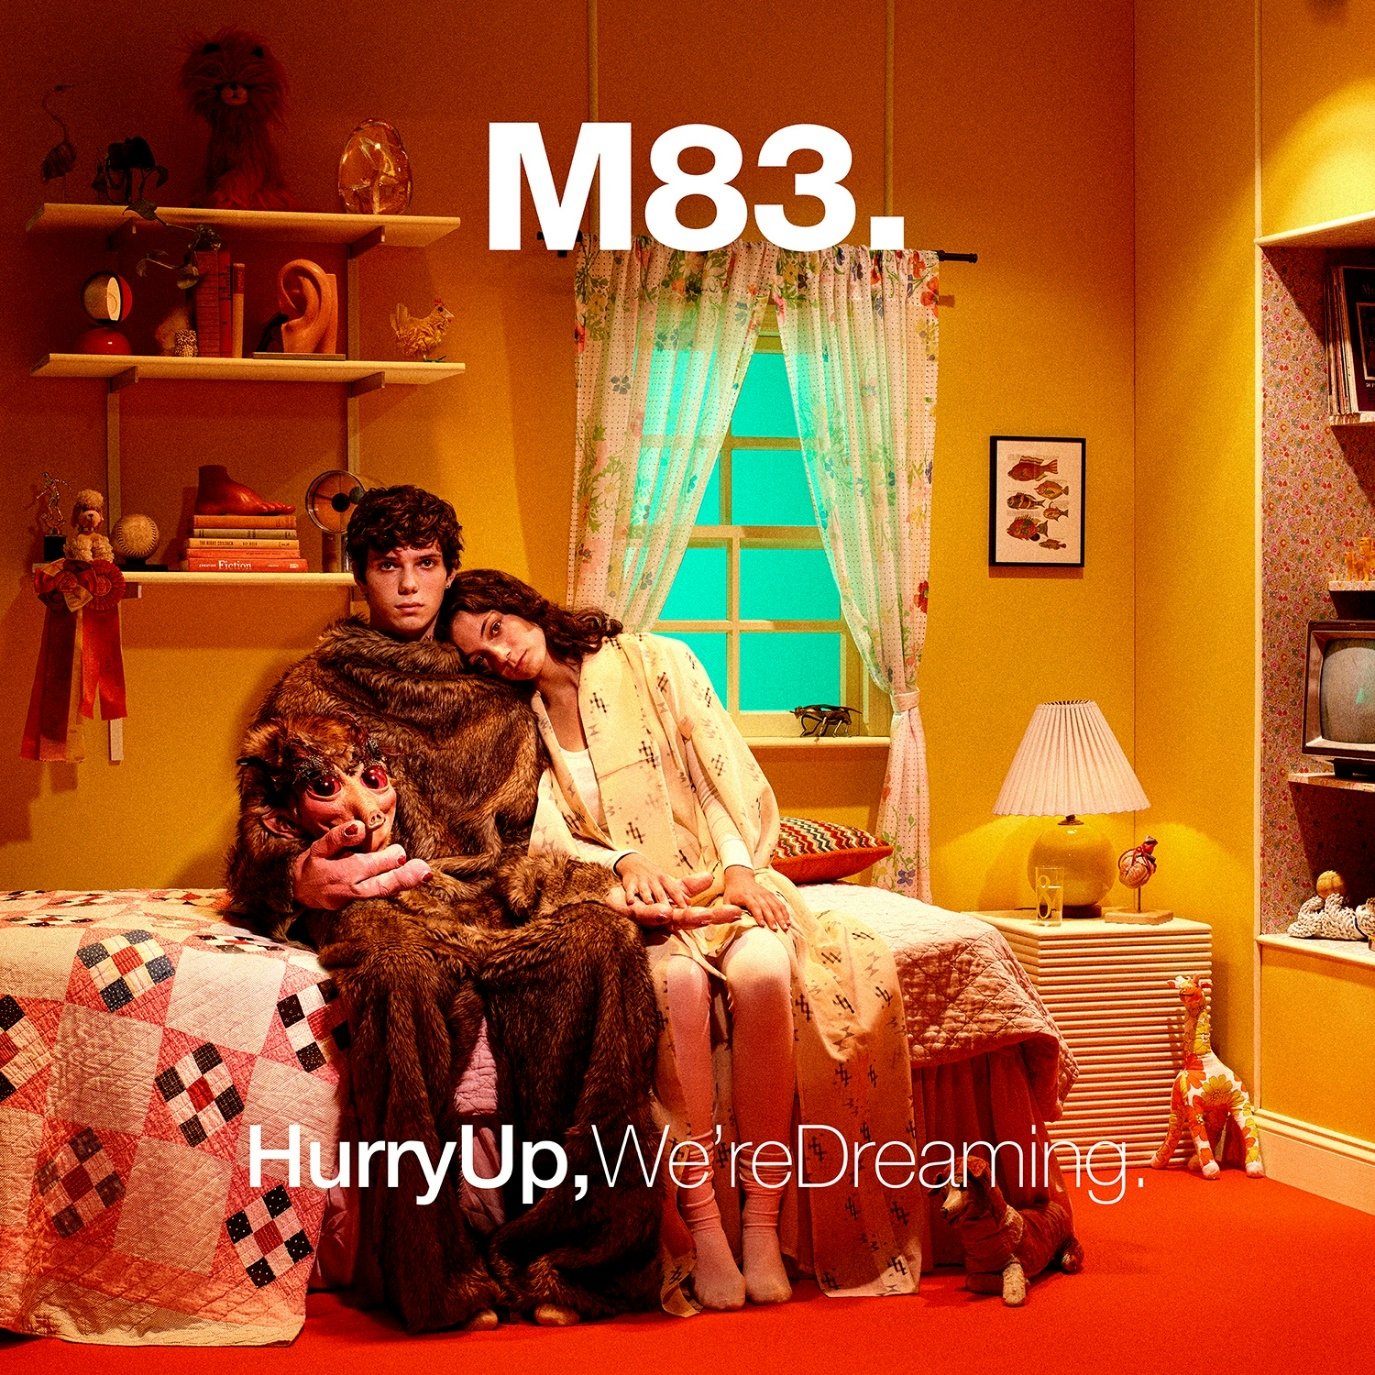 Album artwork for Hurry Up We're Dreaming (10th Anniversary) by M83